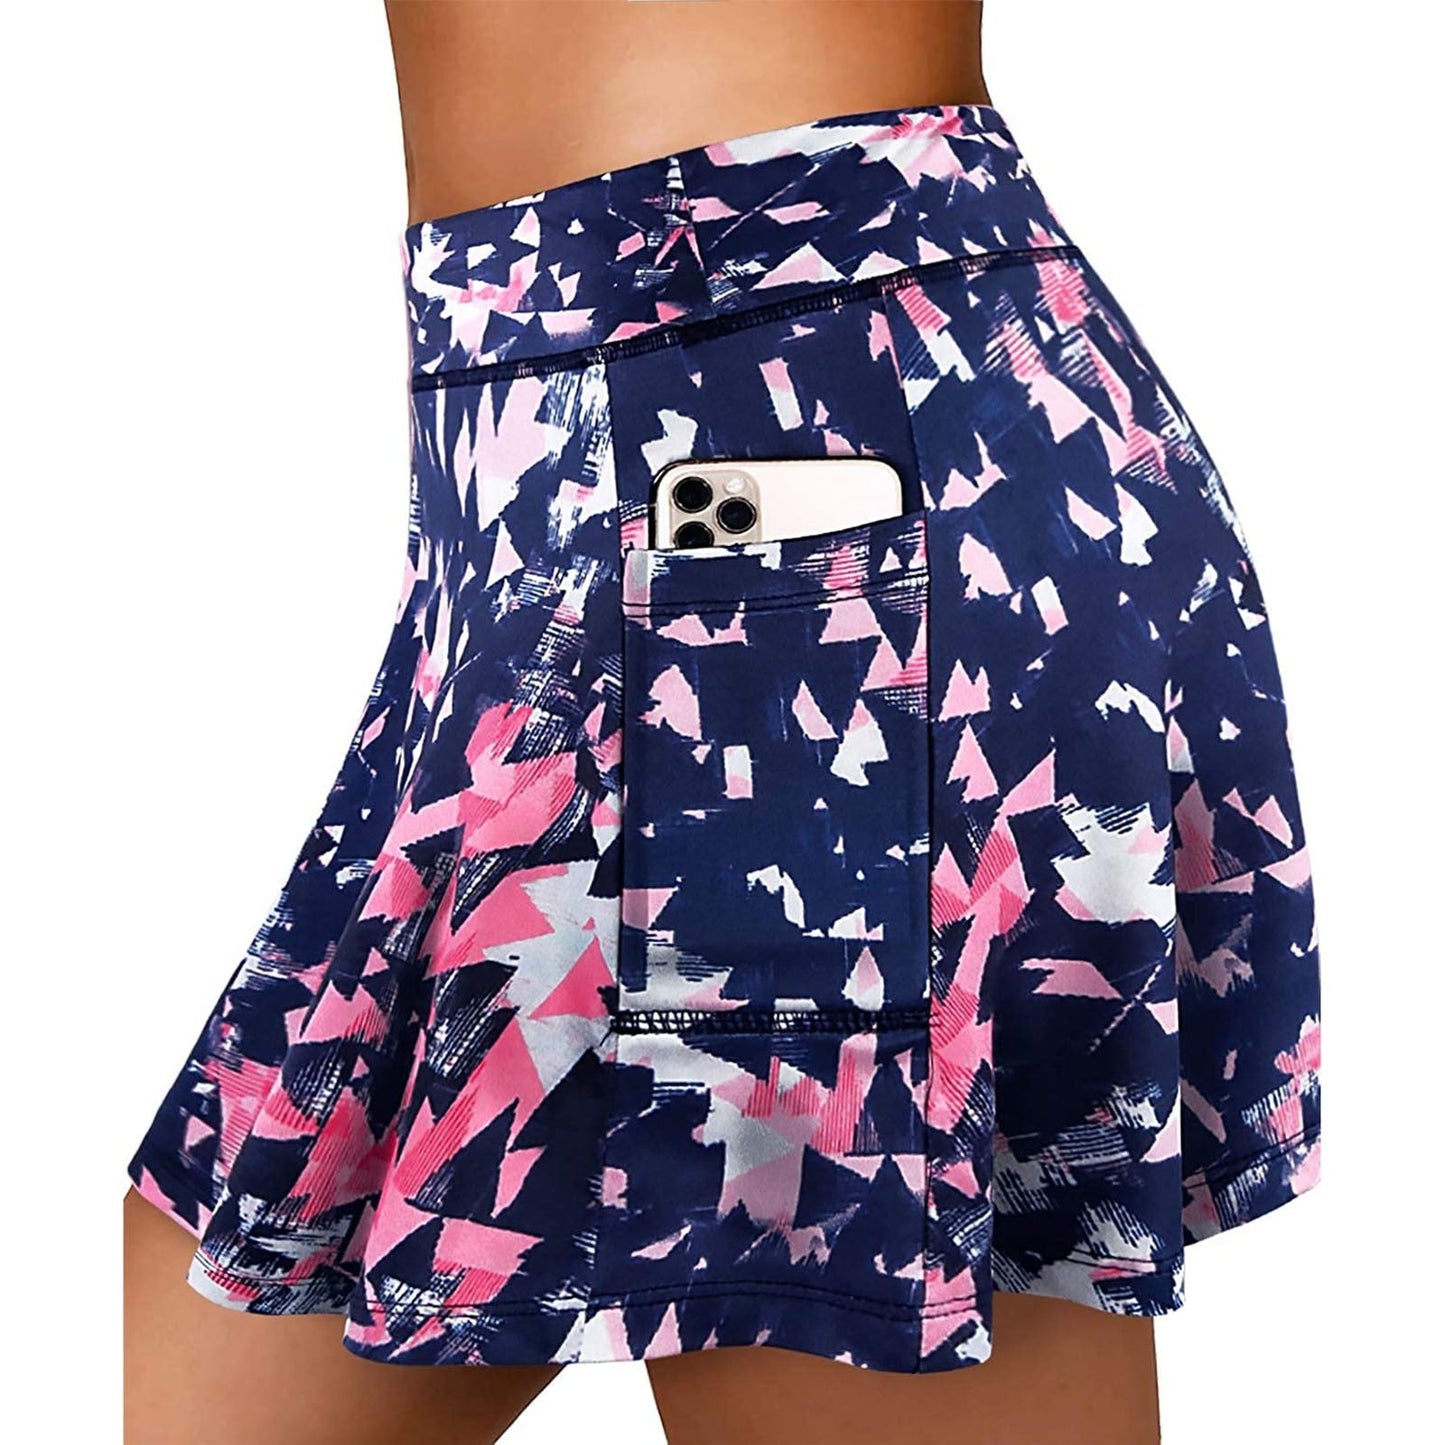 Fashionable Tennis Skorts with Floral Print (with pocket) - Linions